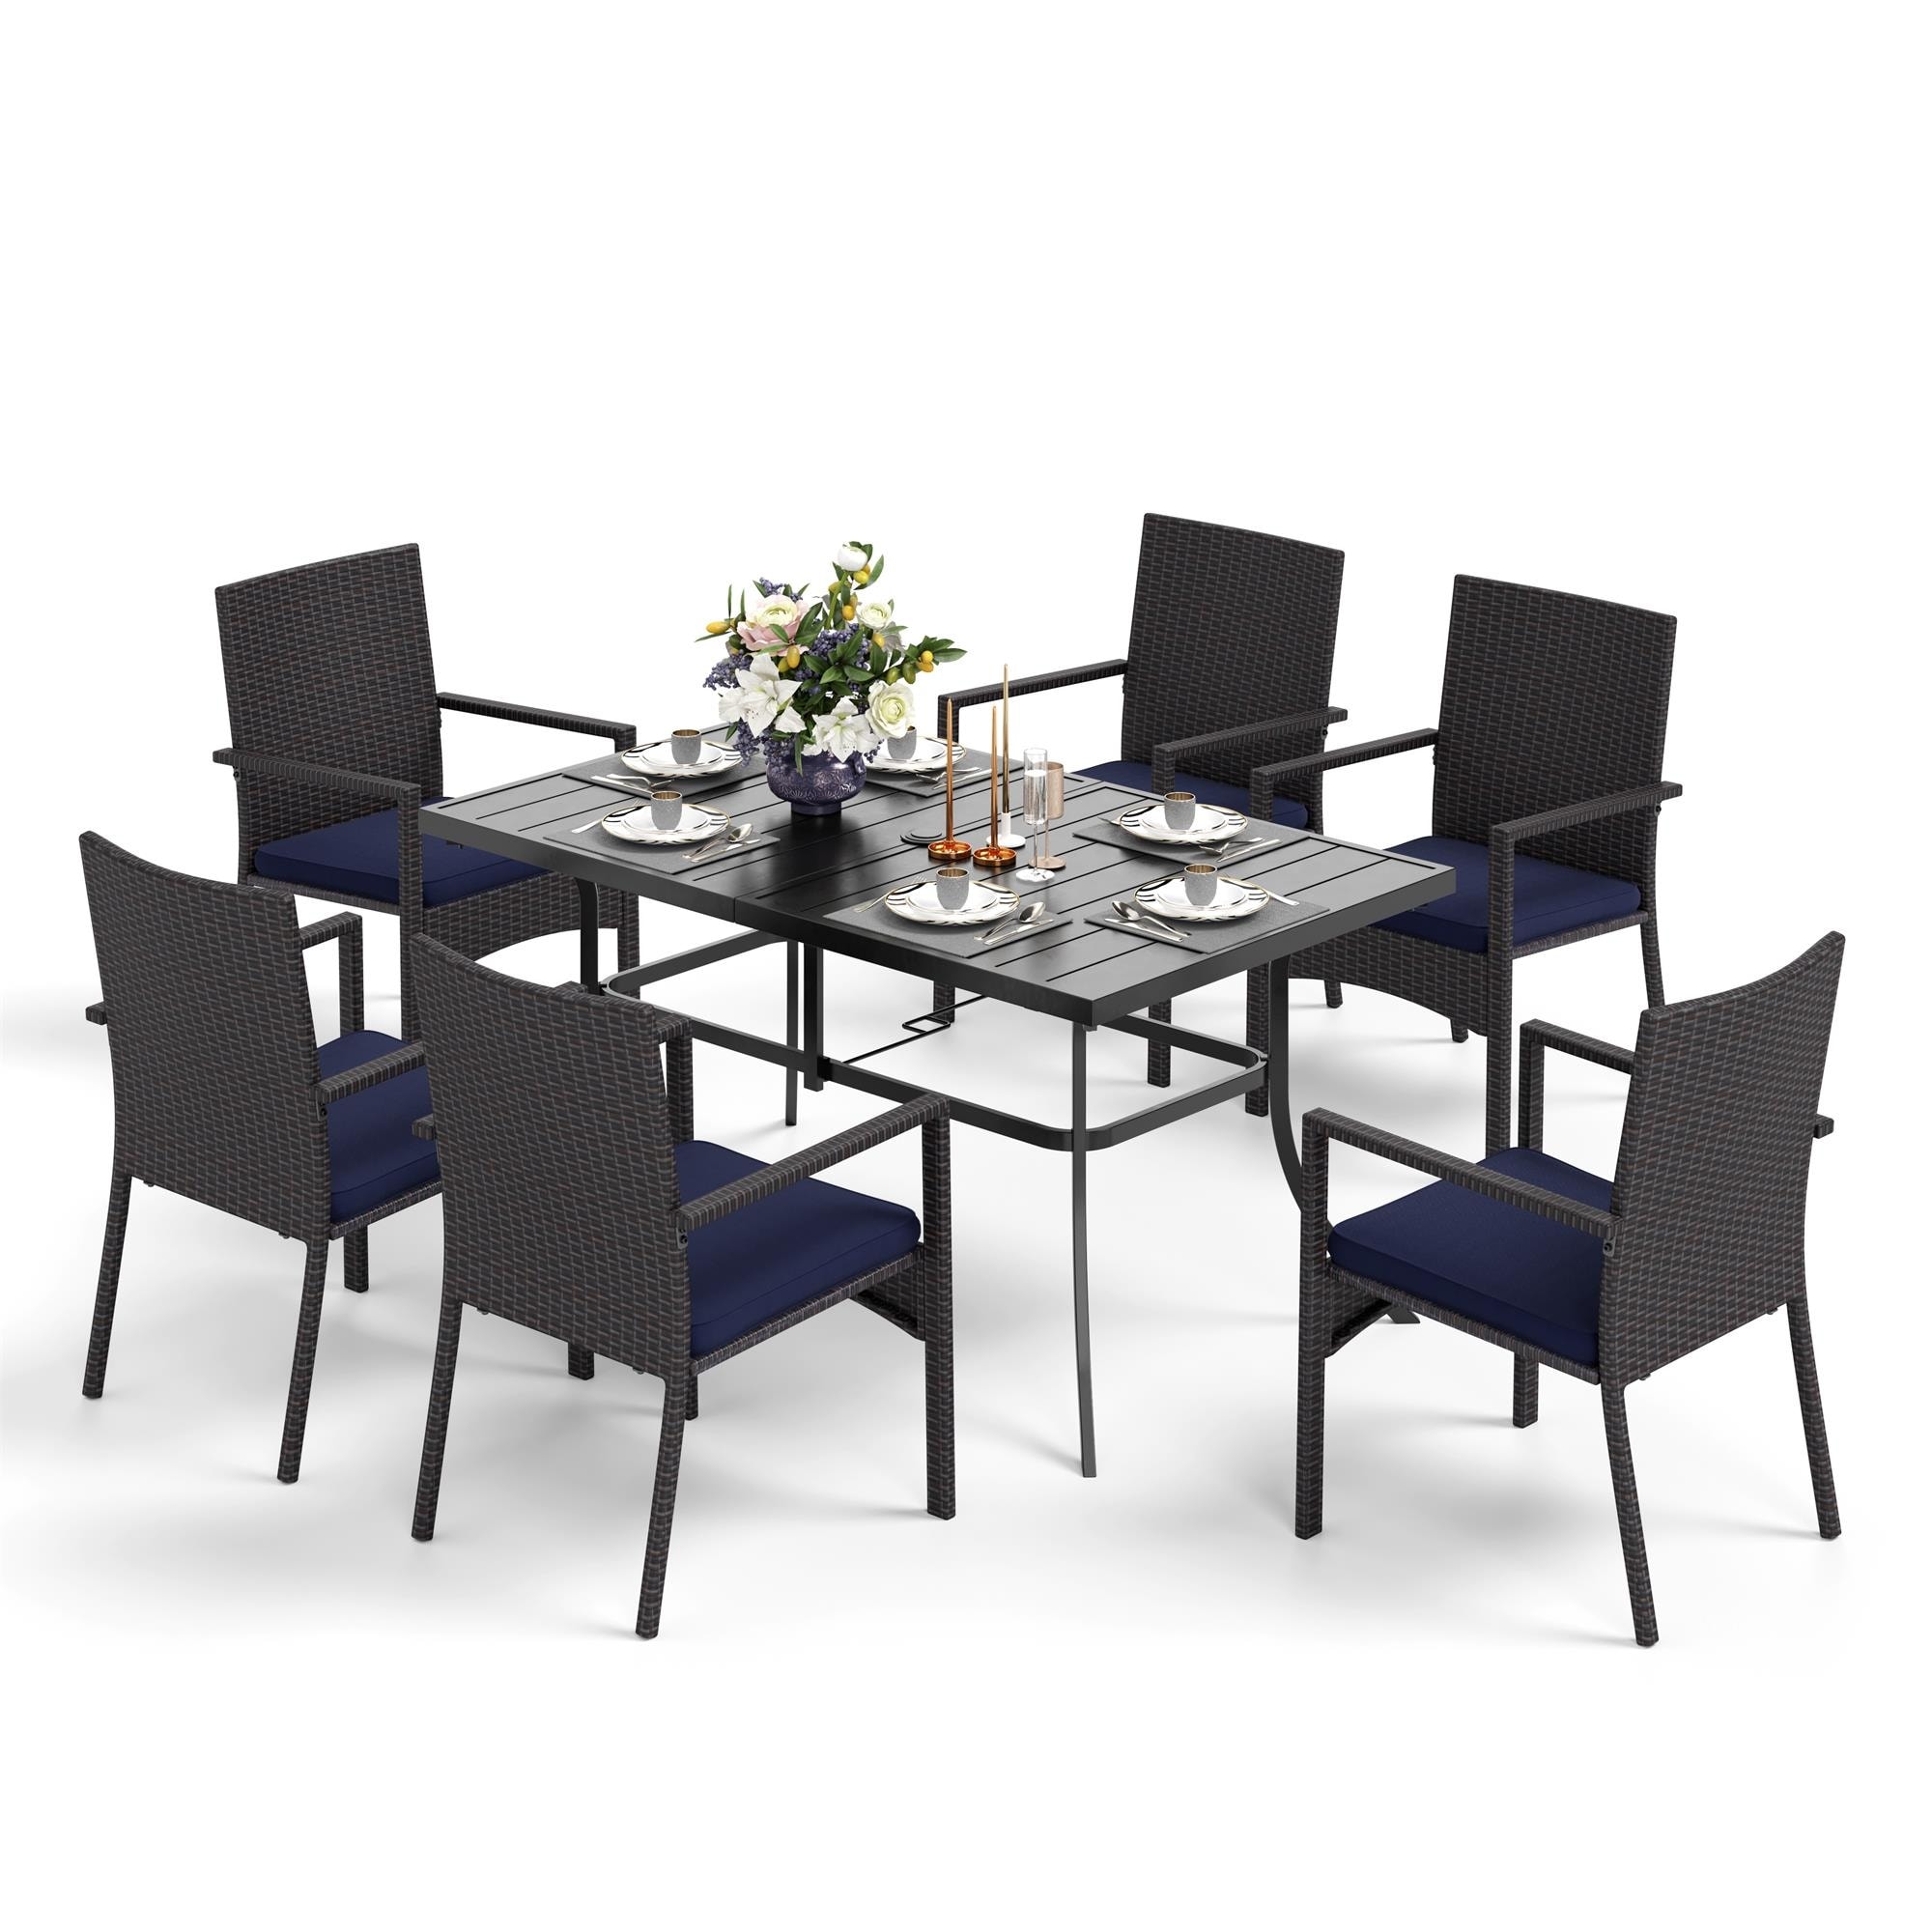 7/8 Pieces Outdoor Patio Dining Set  6 Pe Rattan Chairs With Cushions And 1 Rectangle Metal Table